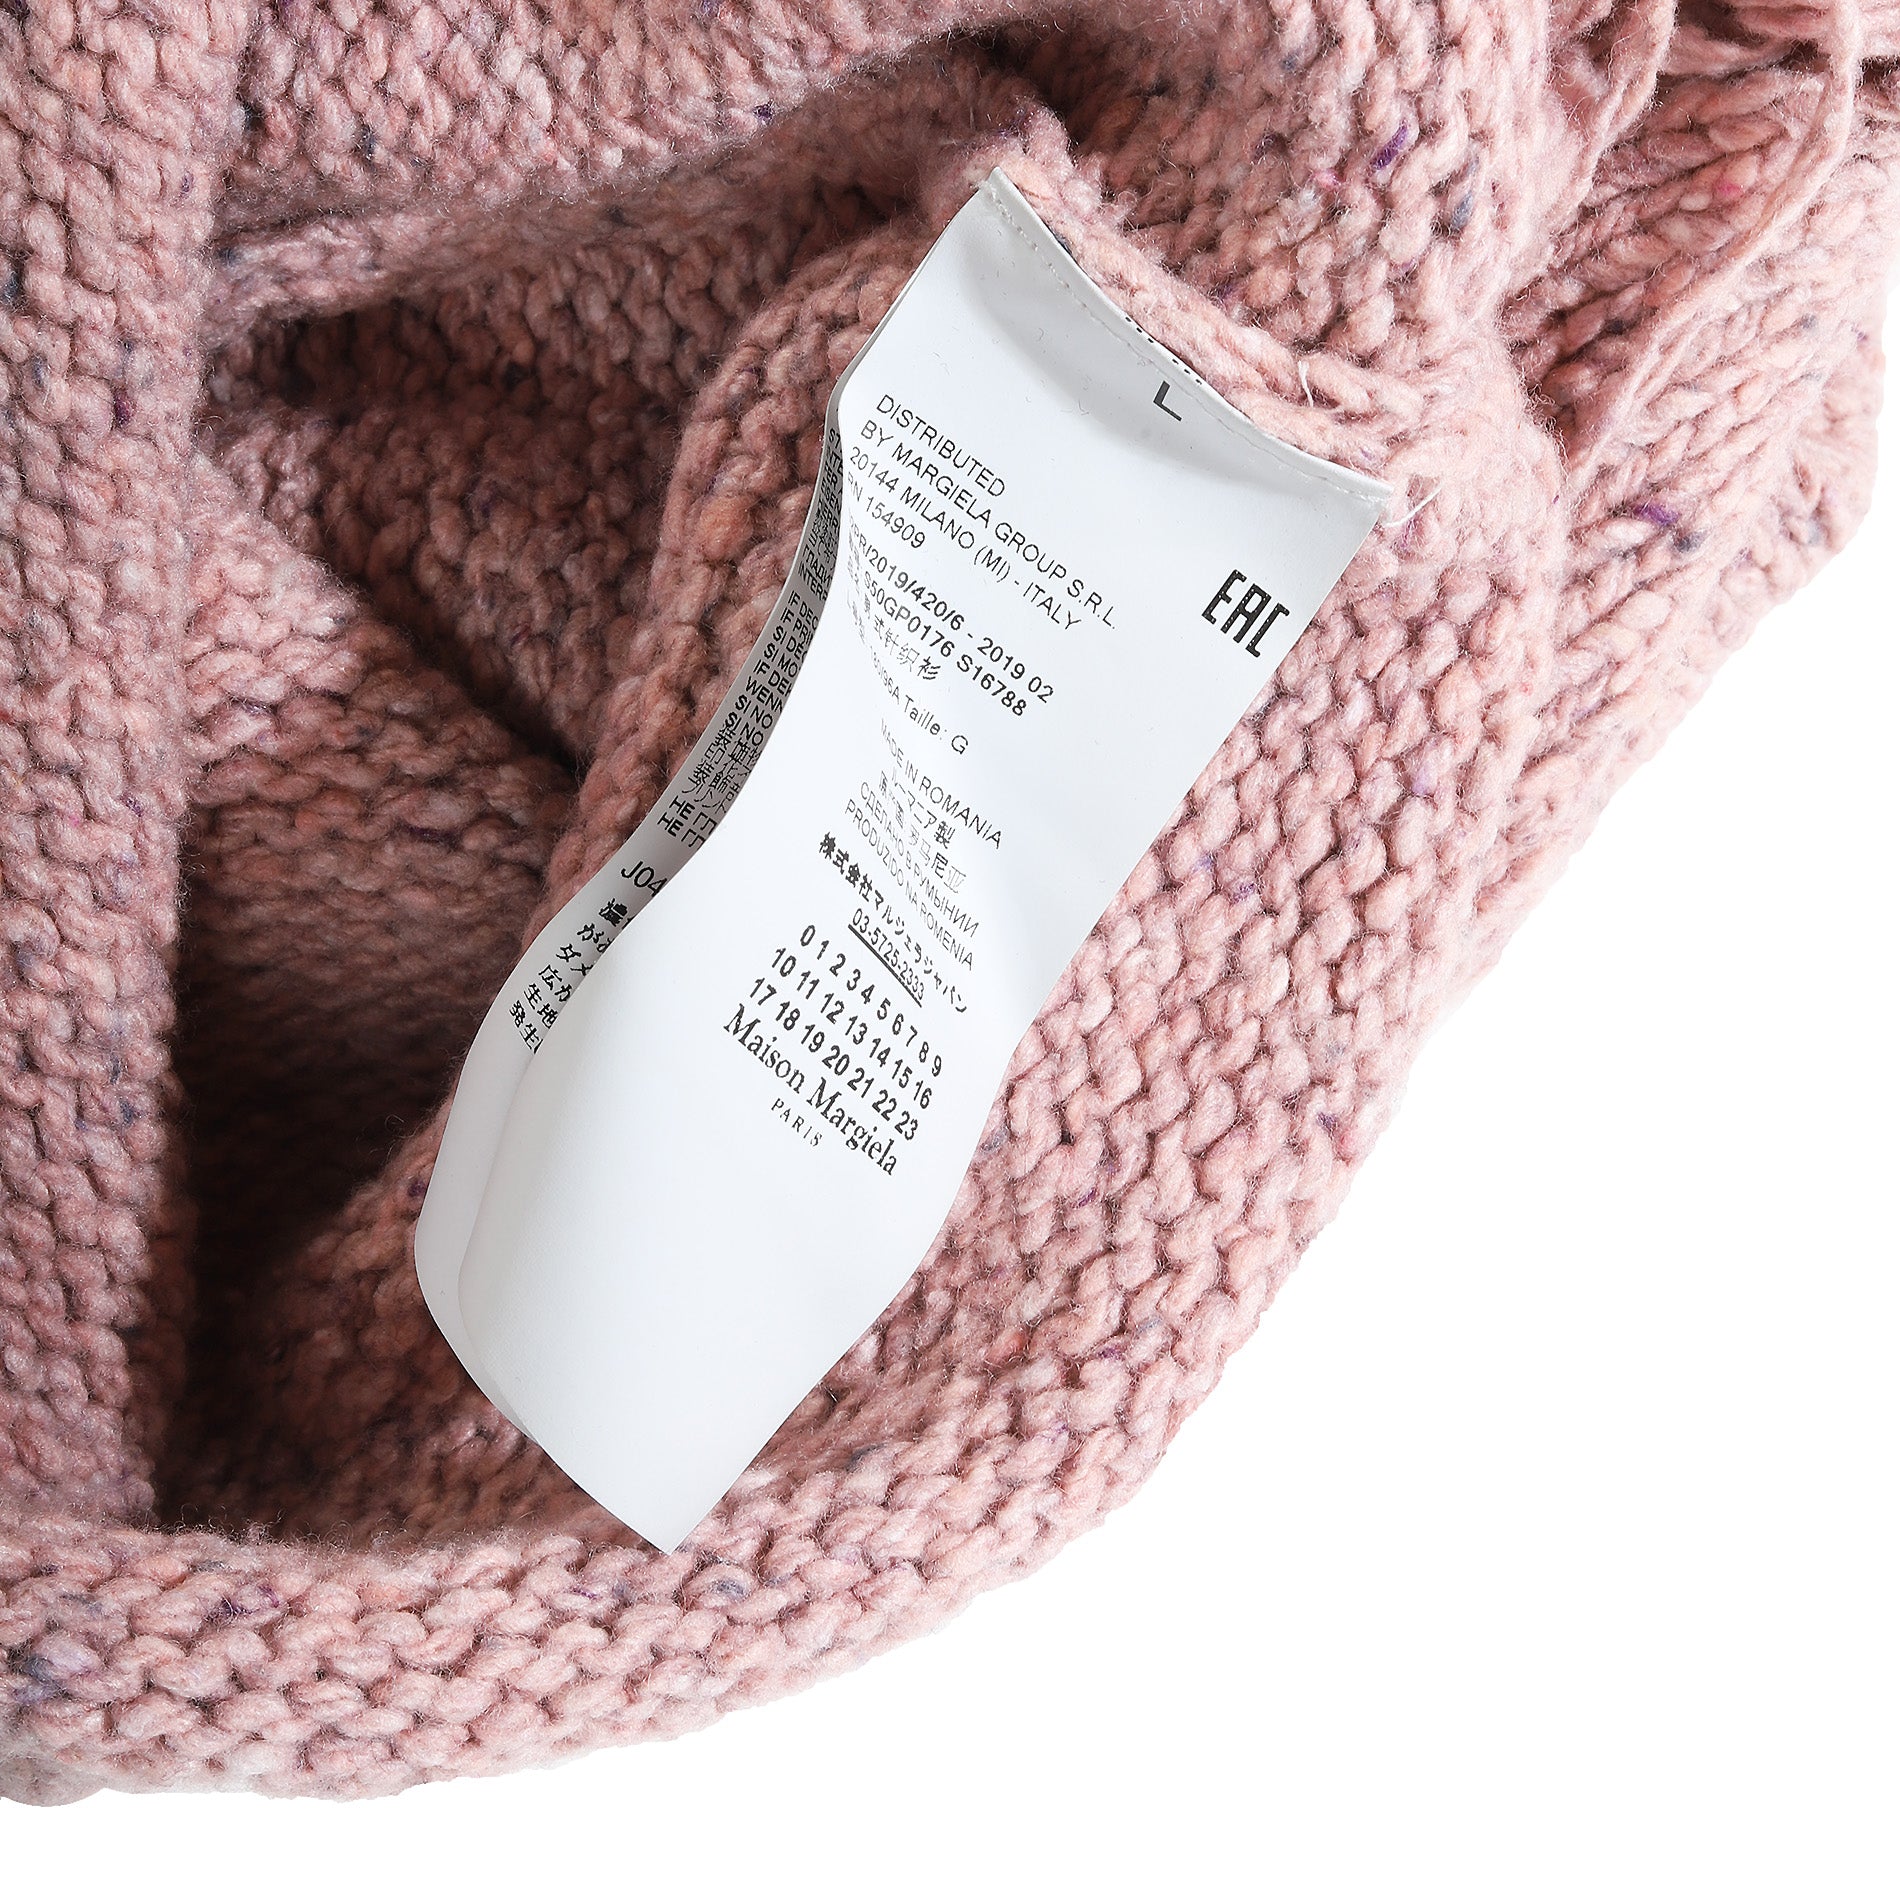 Maison Martin Margiela AW19 Distressed Dust Pink Knit Sweater